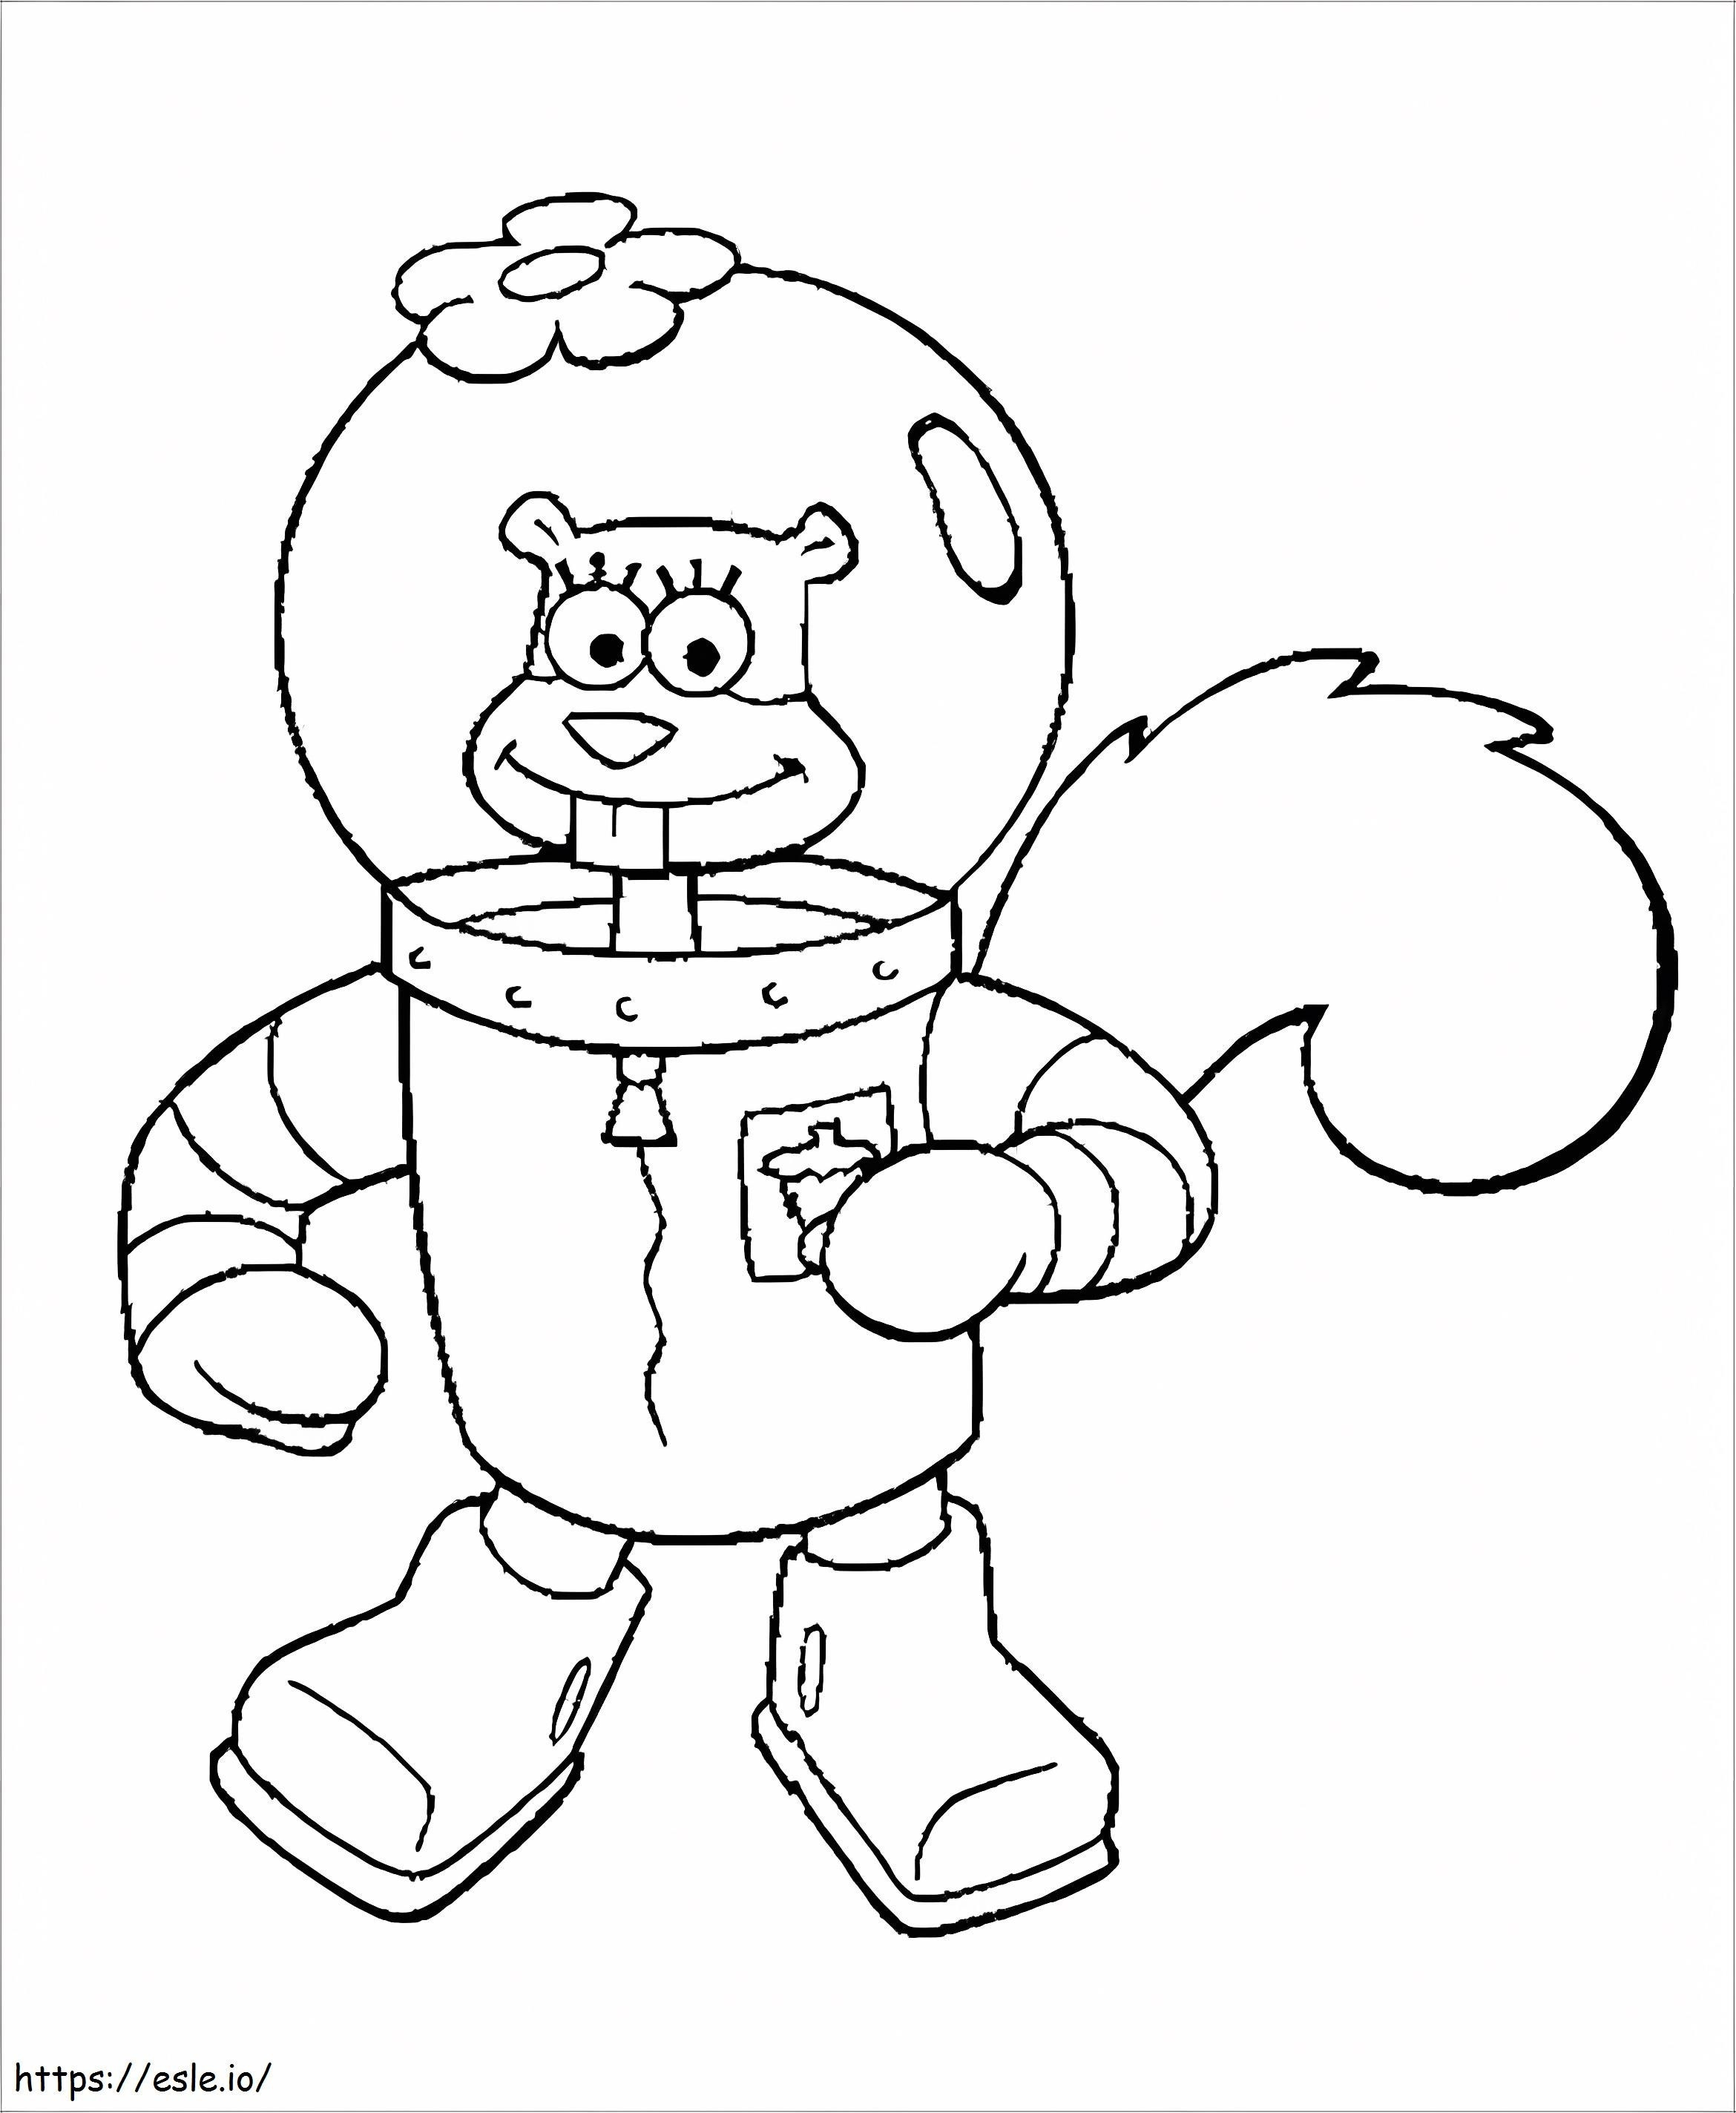 Smiling Sandy Cheeks coloring page